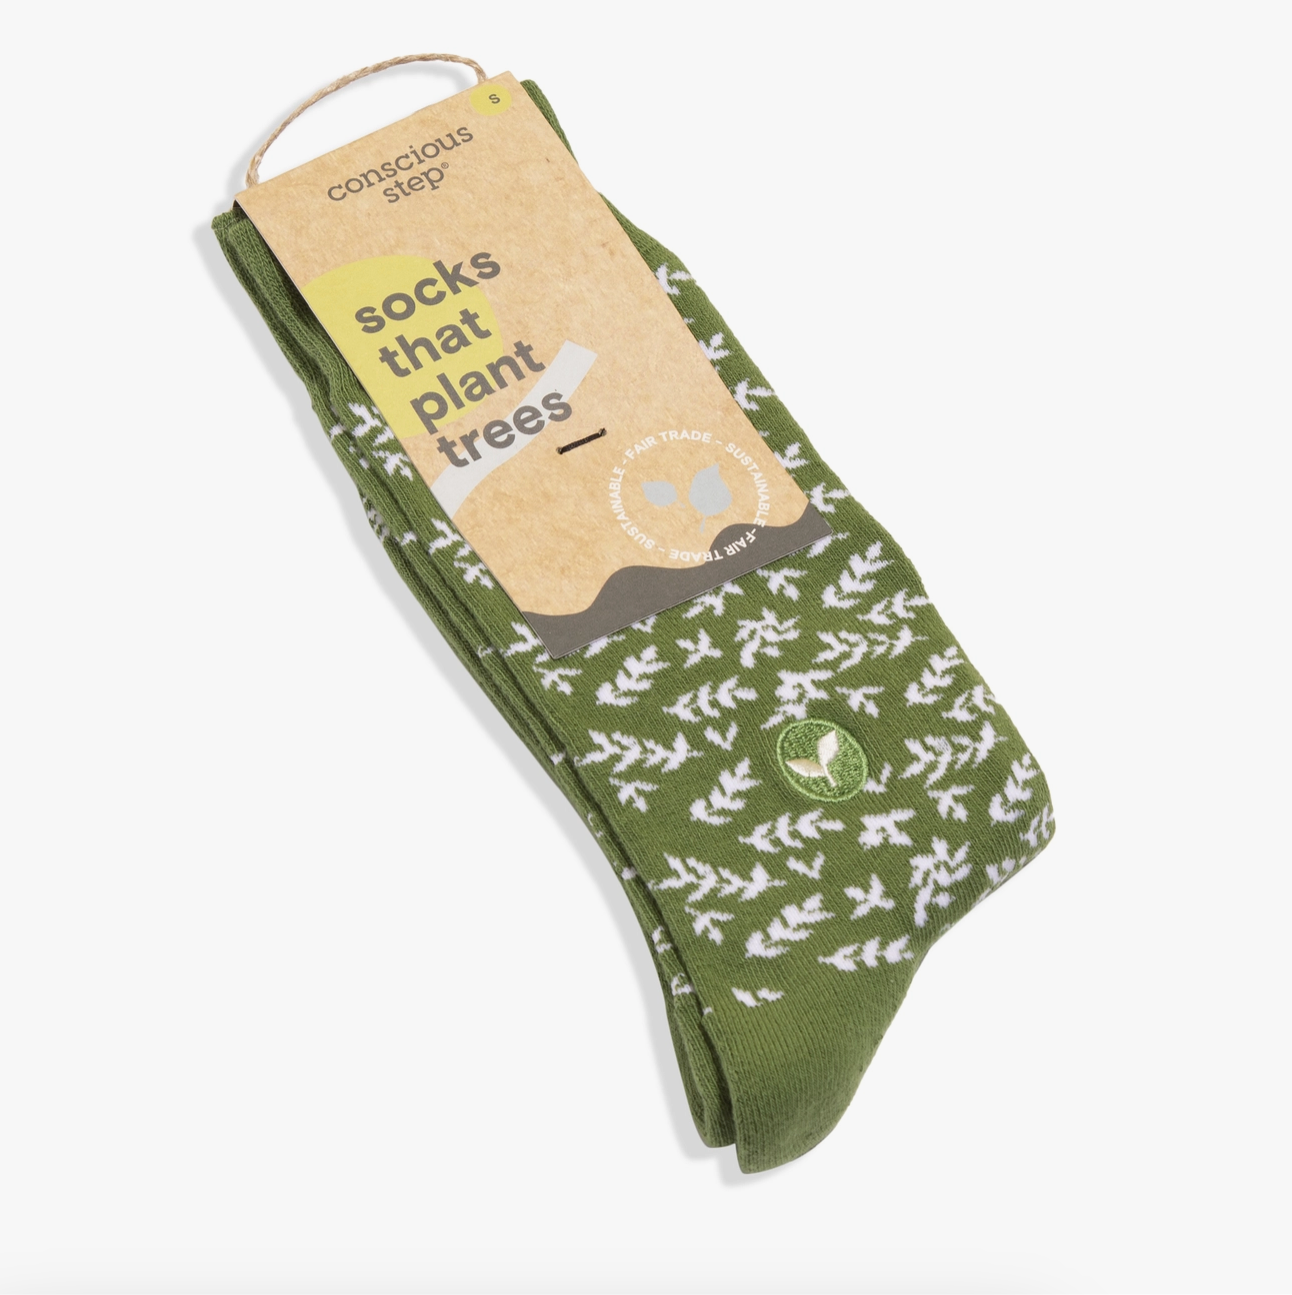 Conscious Step - Socks that Plant Trees (Green Branches)  Conscious Step Small  -better made easy-eco-friendly-sustainable-gifting